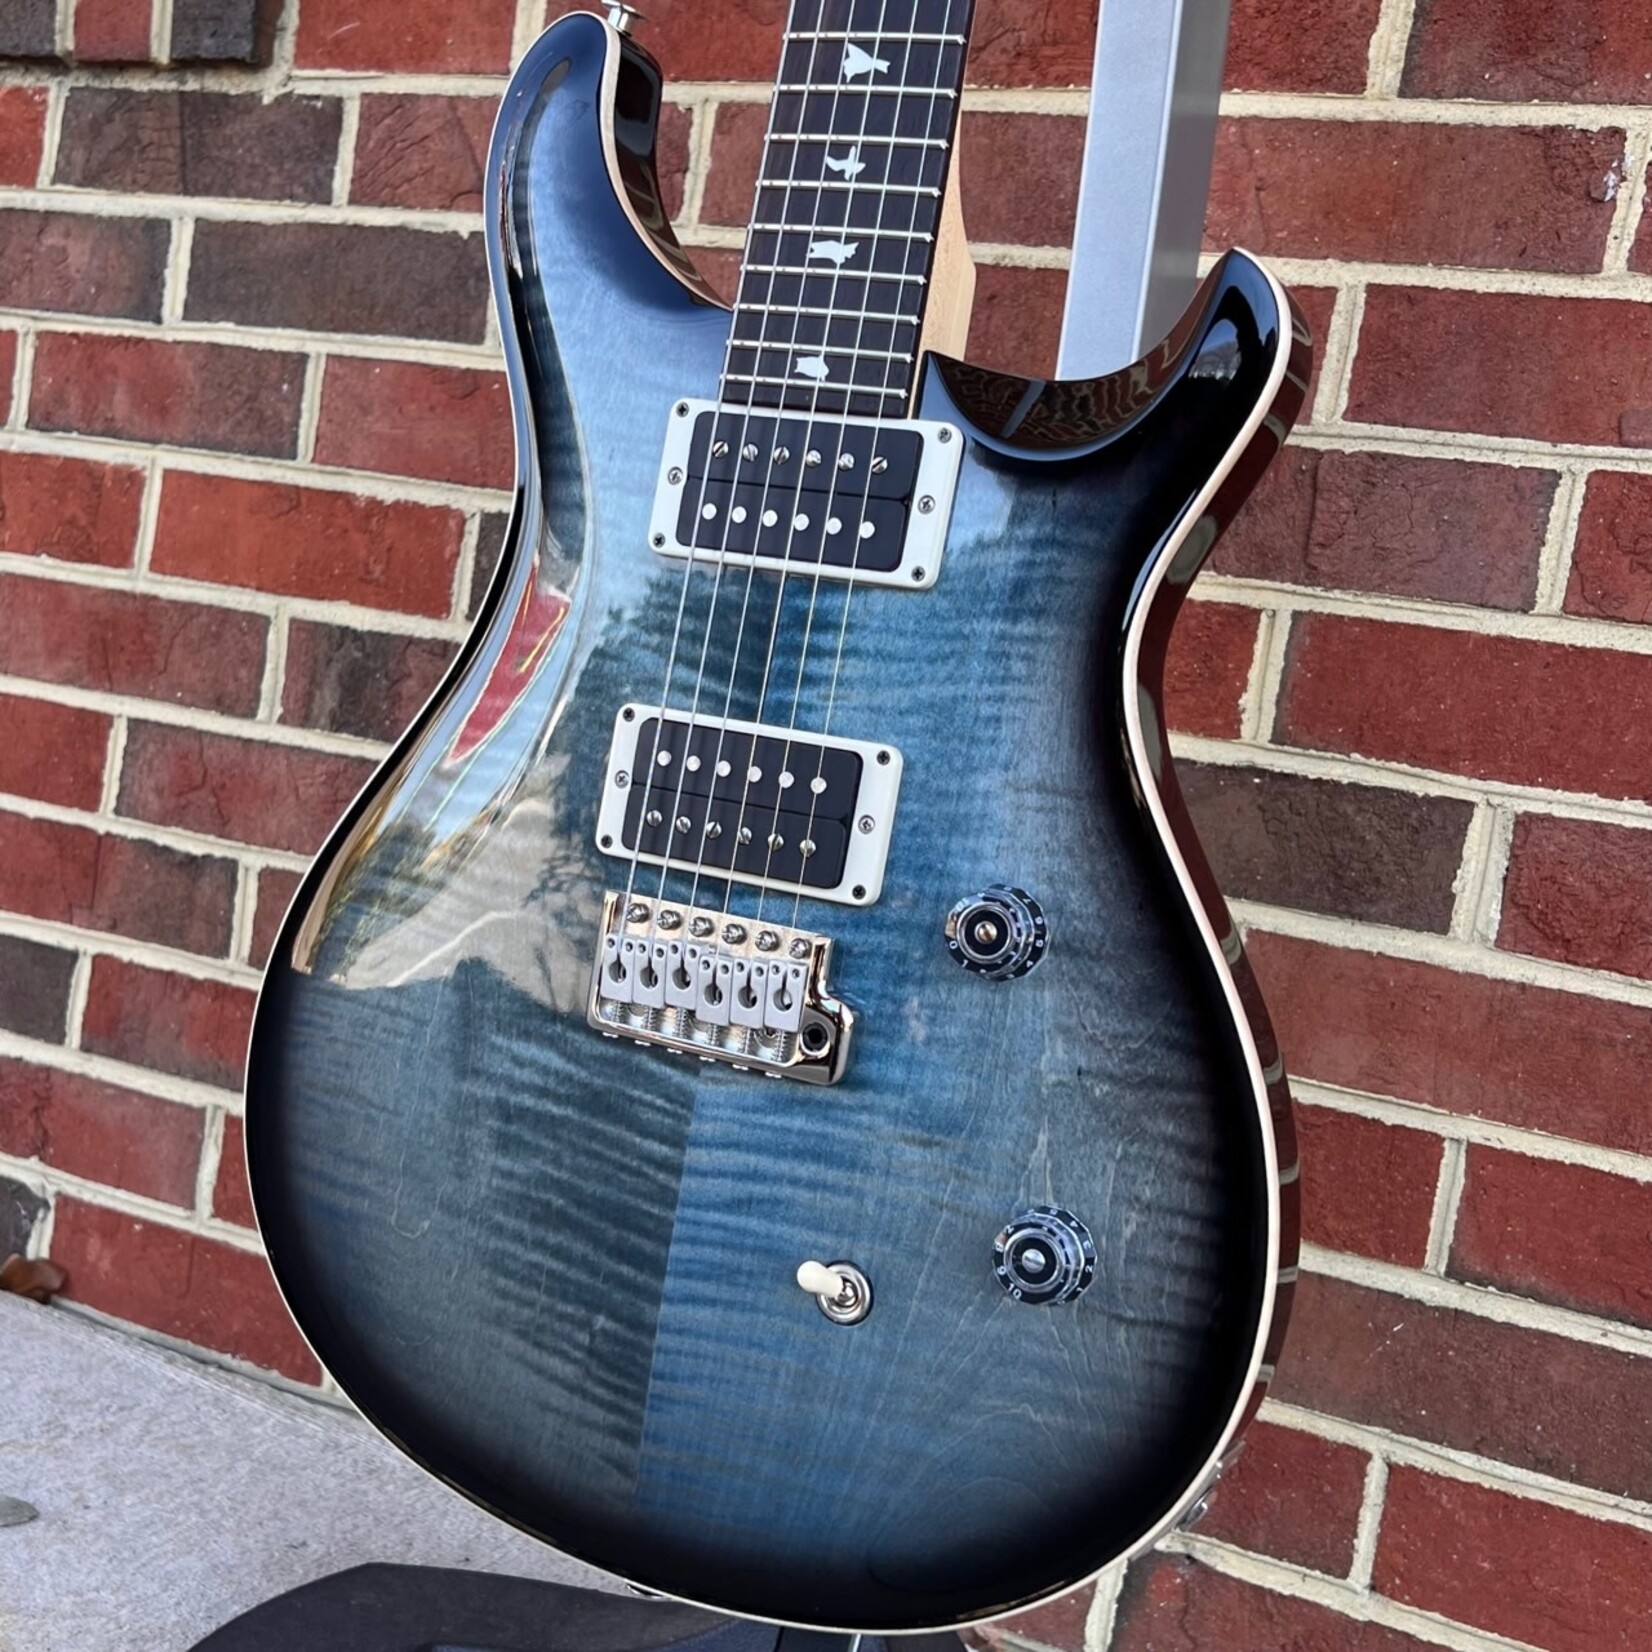 Paul Reed Smith Paul Reed Smith CE24, Faded Blue Smokeburst, Pattern Thin, 85/15 Pickups, Gig Bag